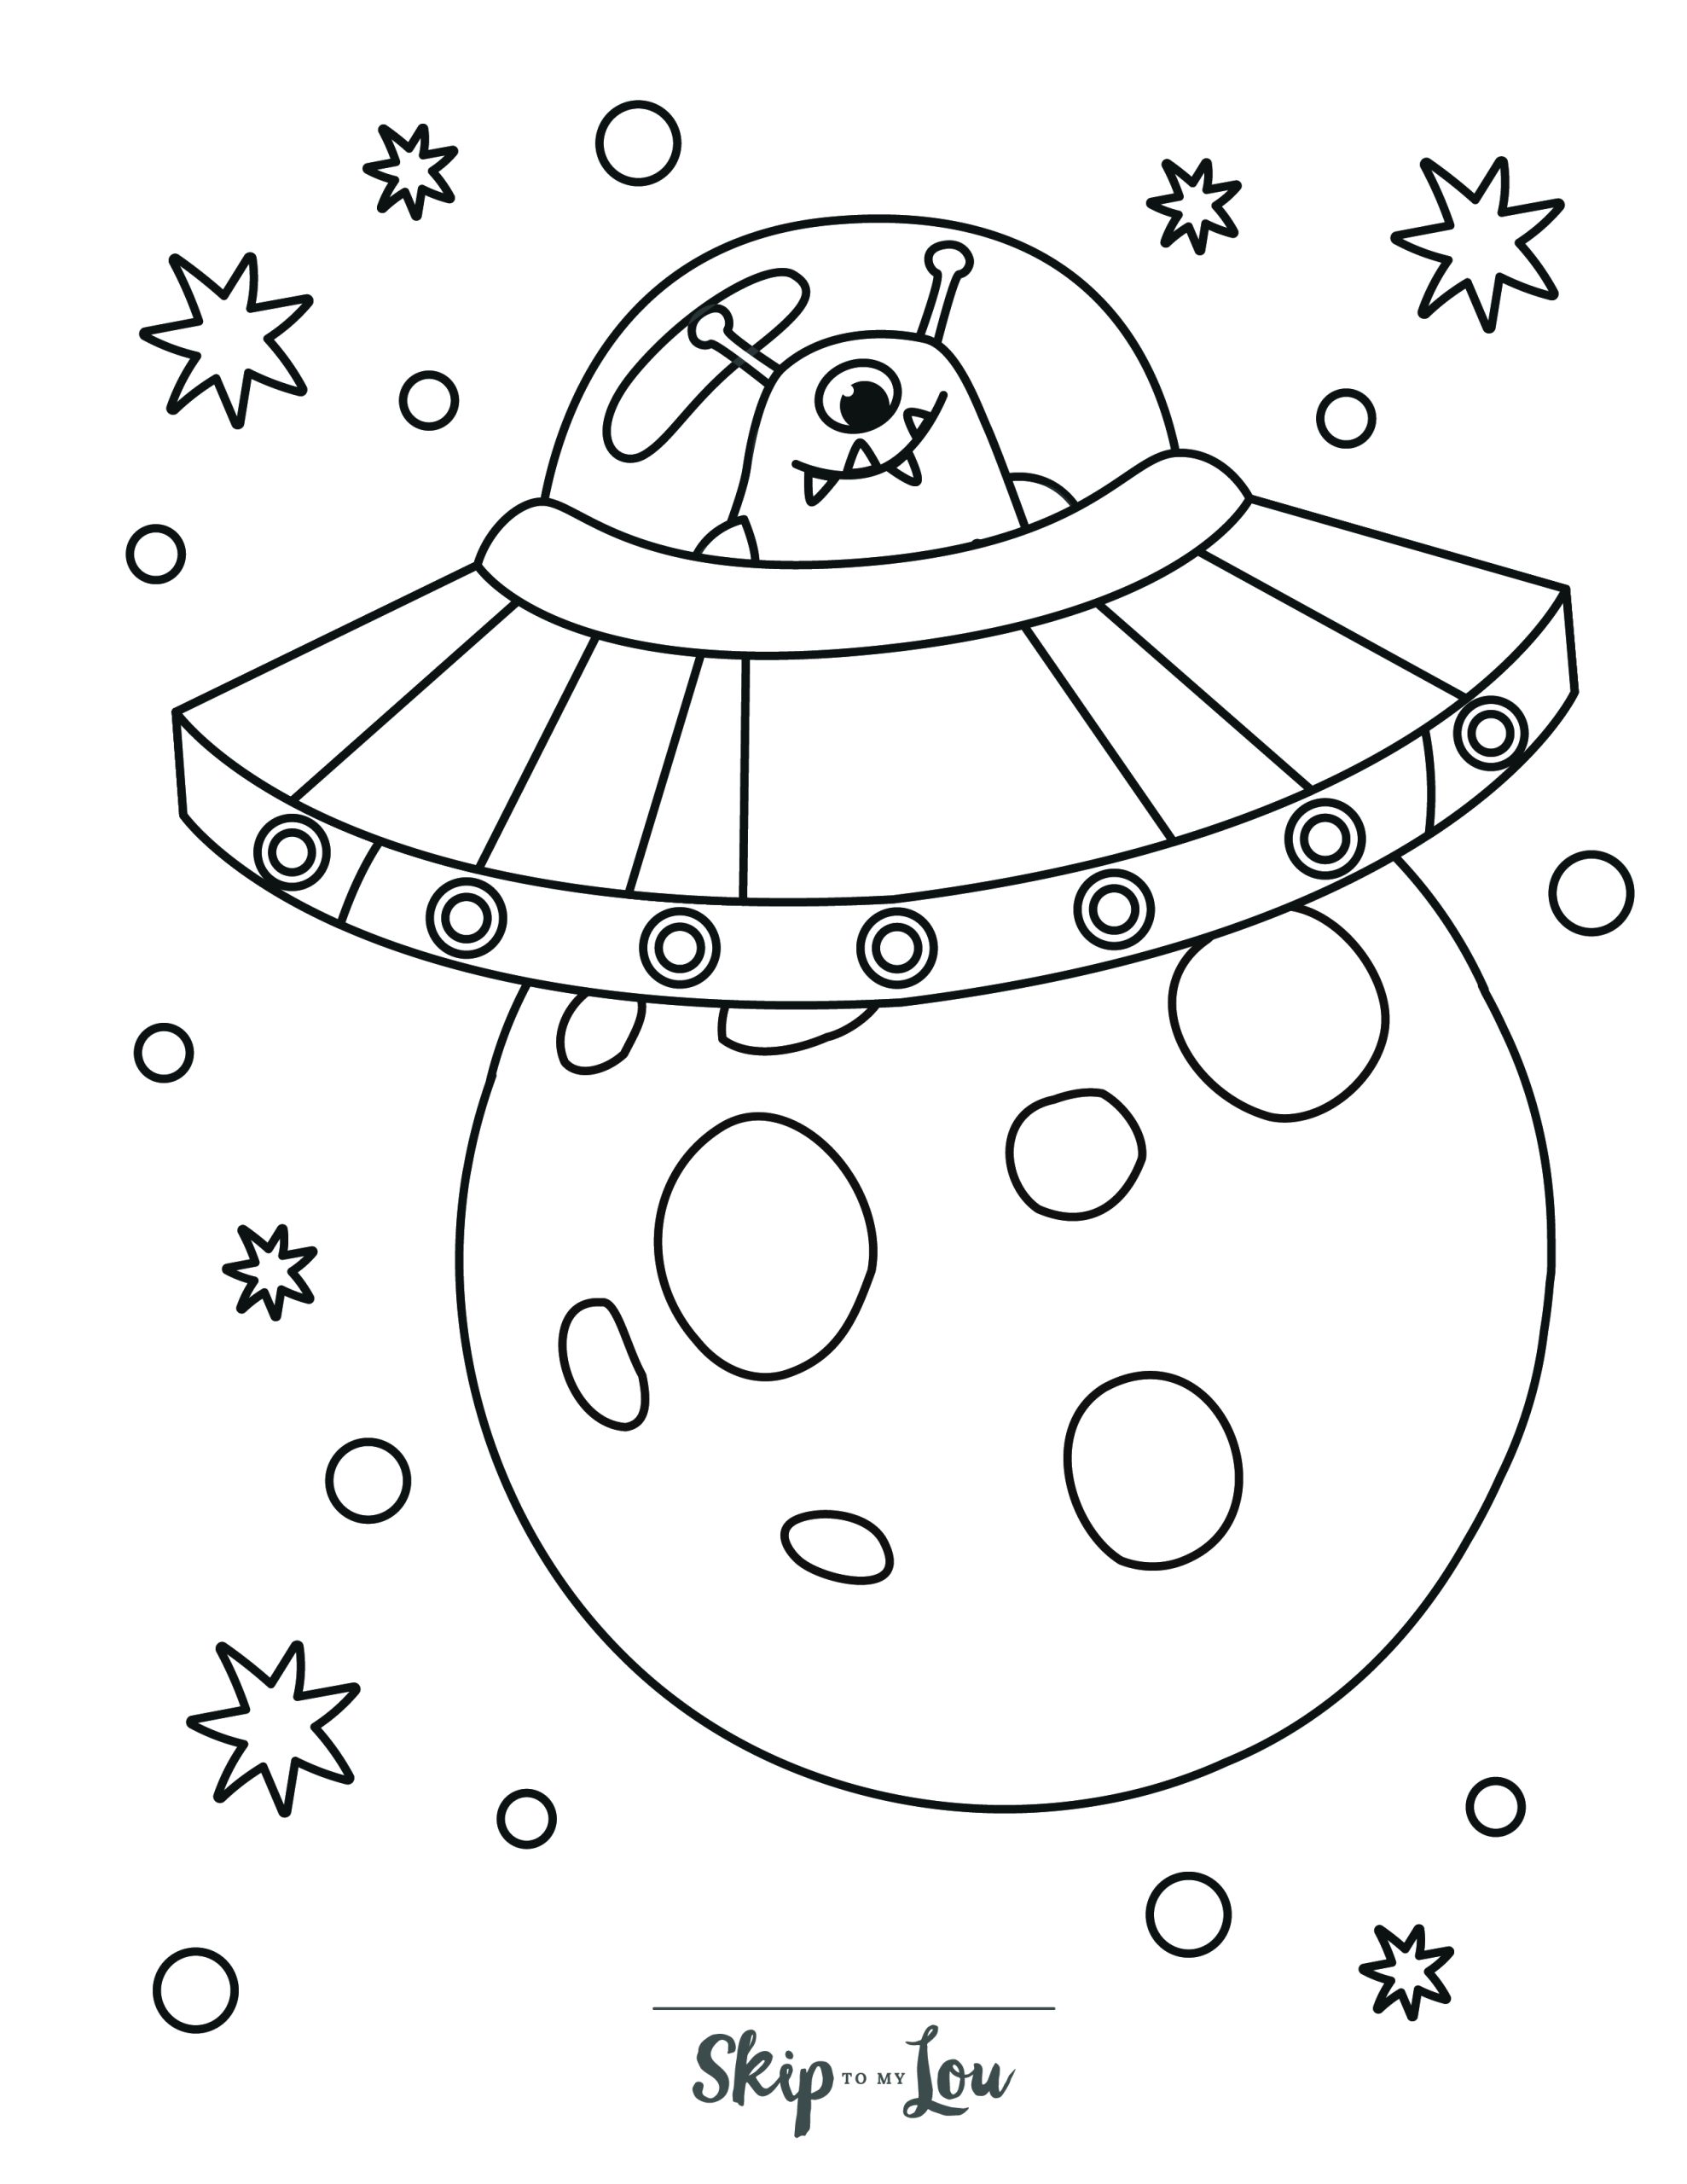 Space Coloring Page 10 - Large spaceship with alien, planet and stars in background